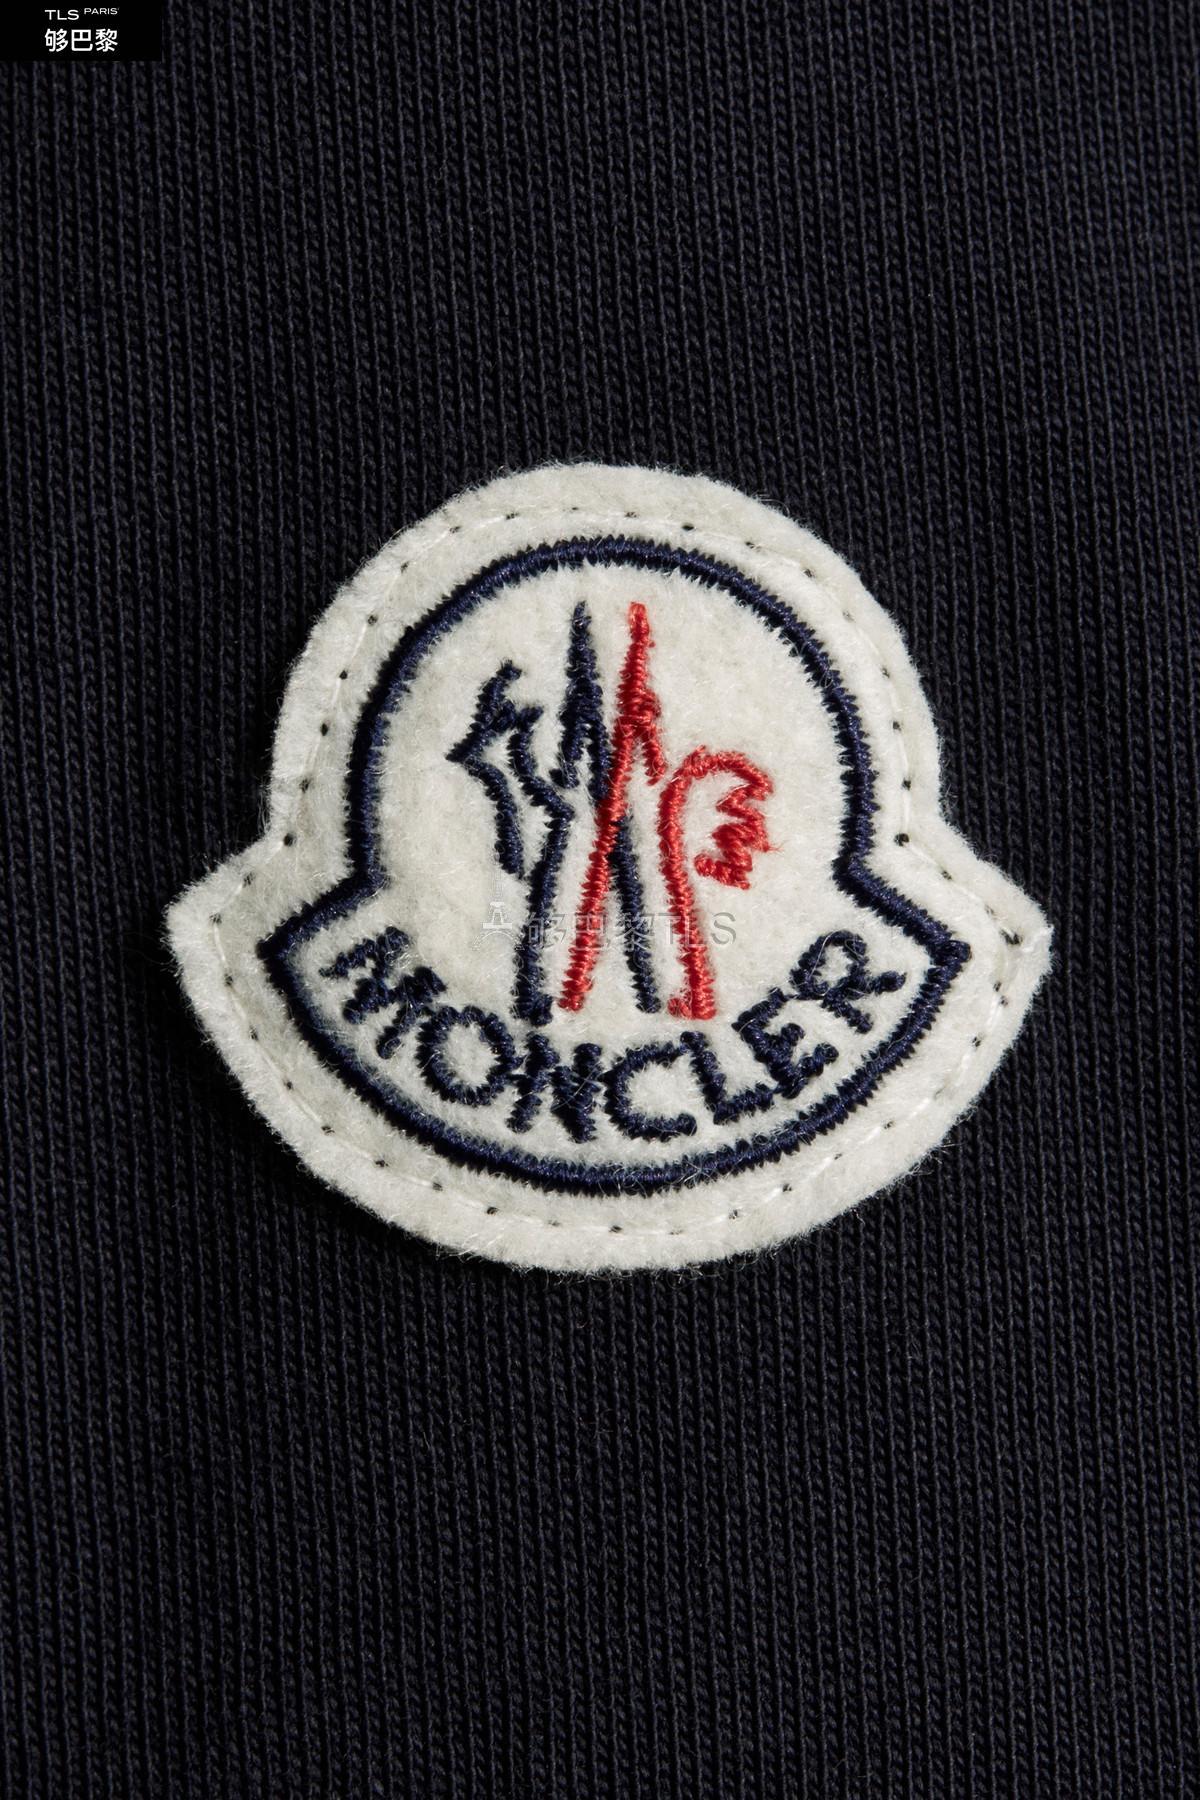 the tricolour band and the raised moncler logo on the chest